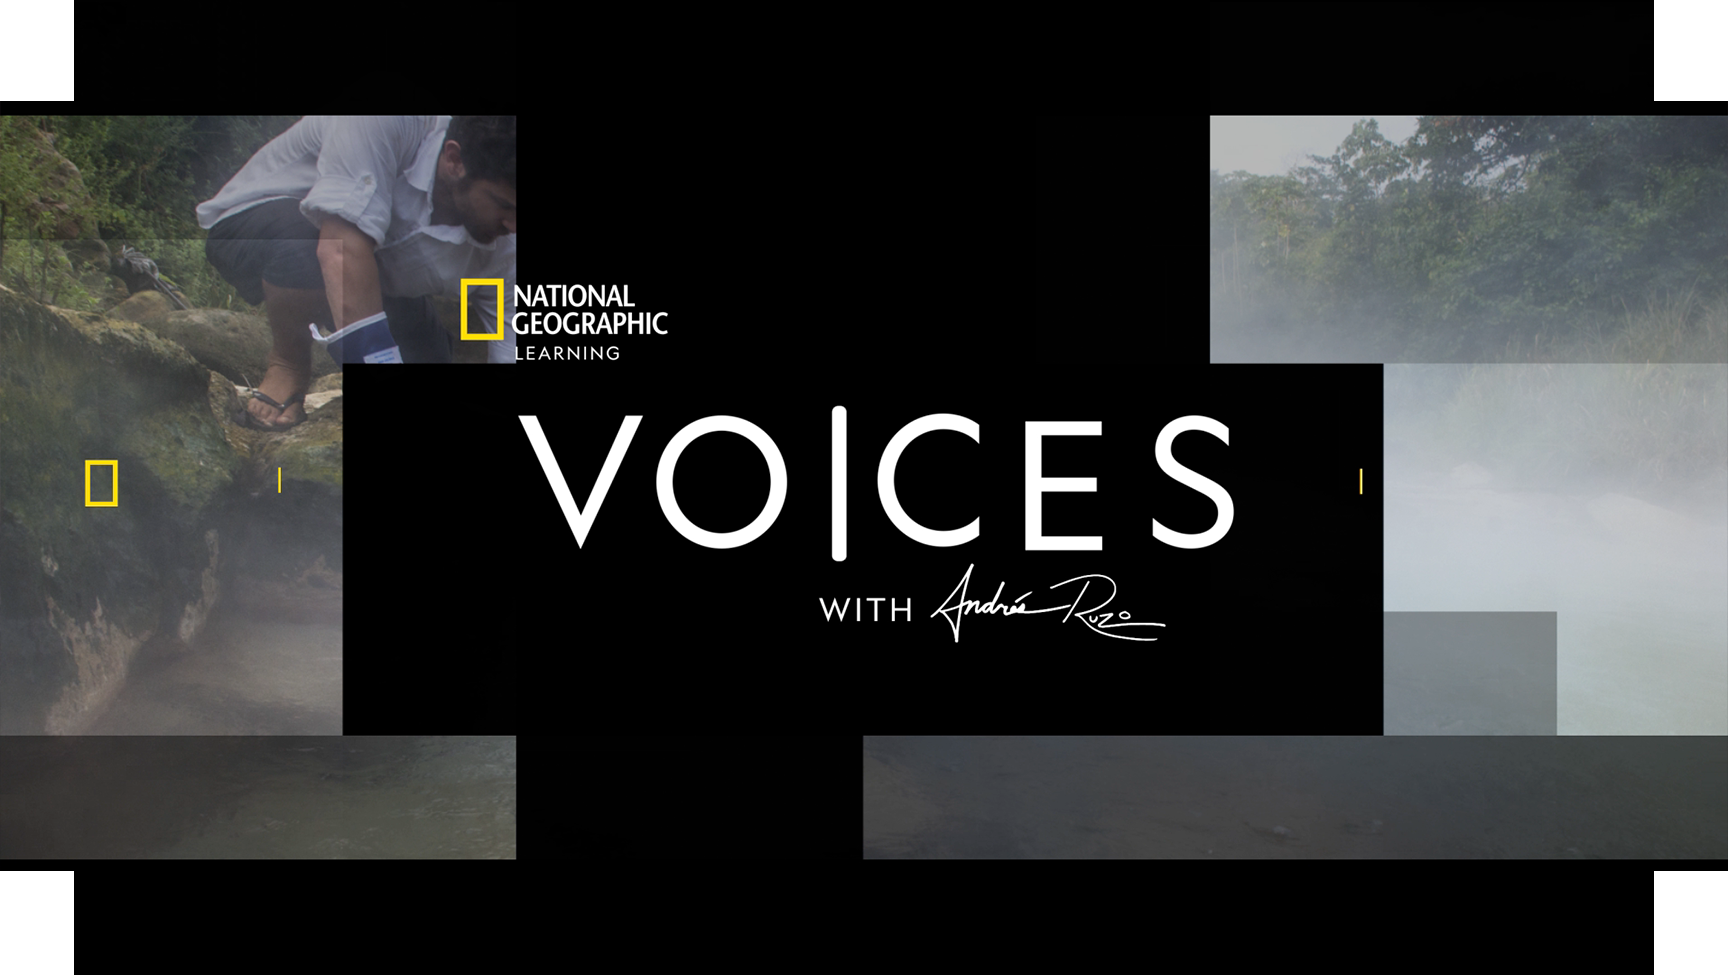 Voices, with Andres Ruzo